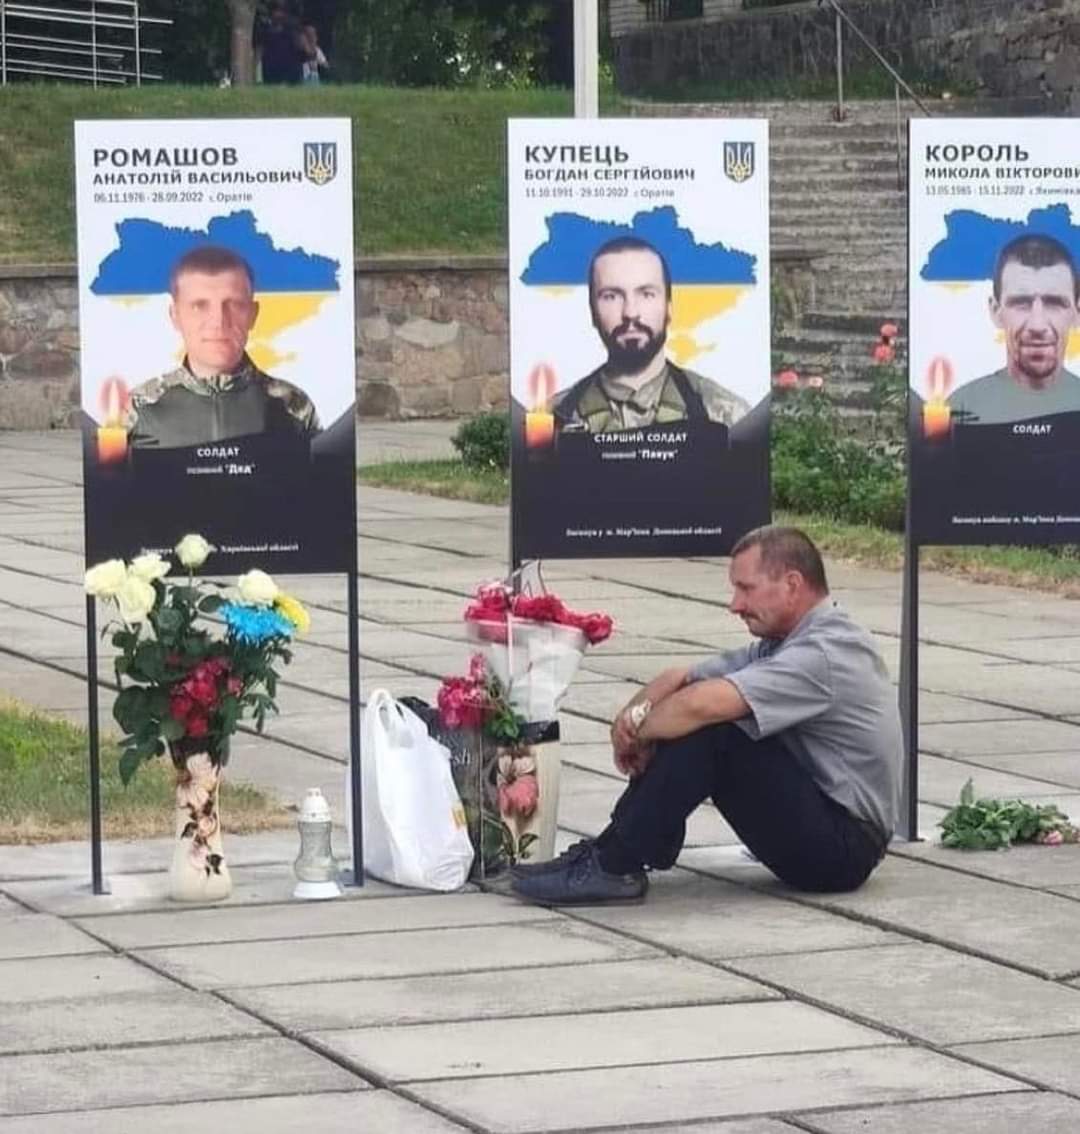 A father mourns his son, who was killed by the #Russians. The price #Ukrainians pay for their freedom is too high, and the pain is unbearable.